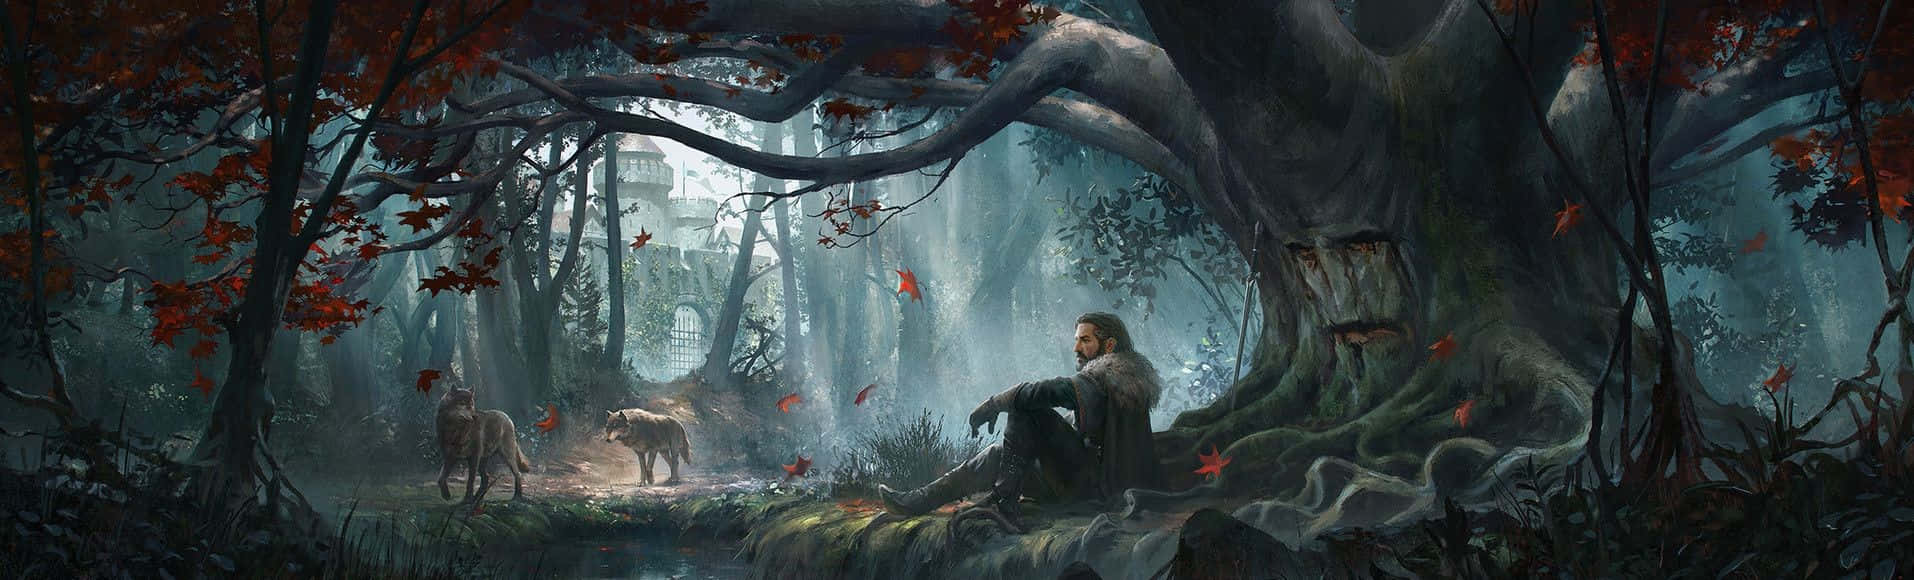 A Painting Of A Man In A Forest Wallpaper